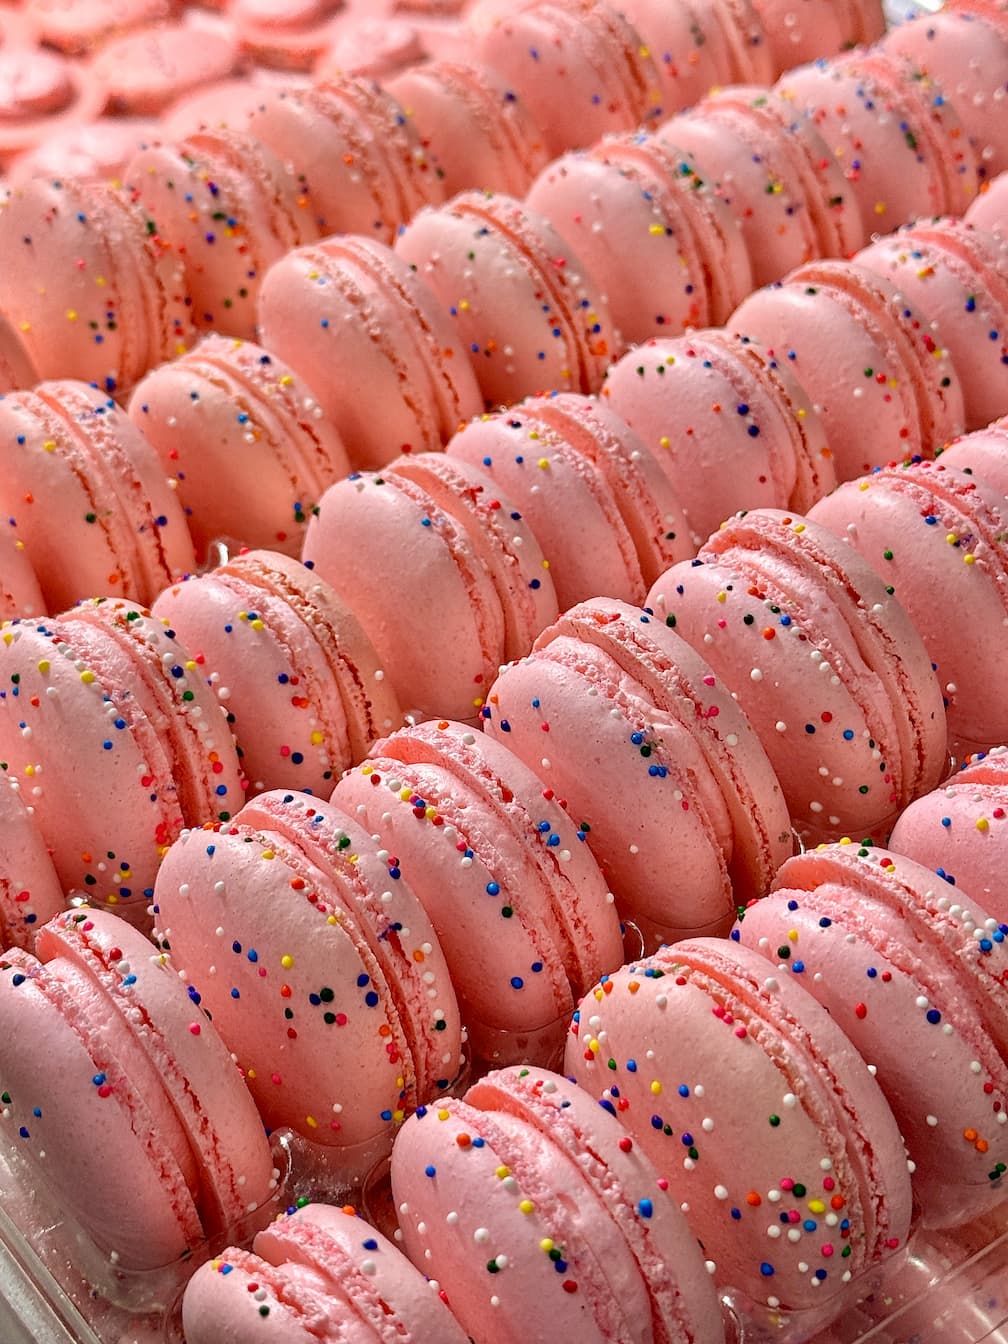 Frosted animal cracker french macarons